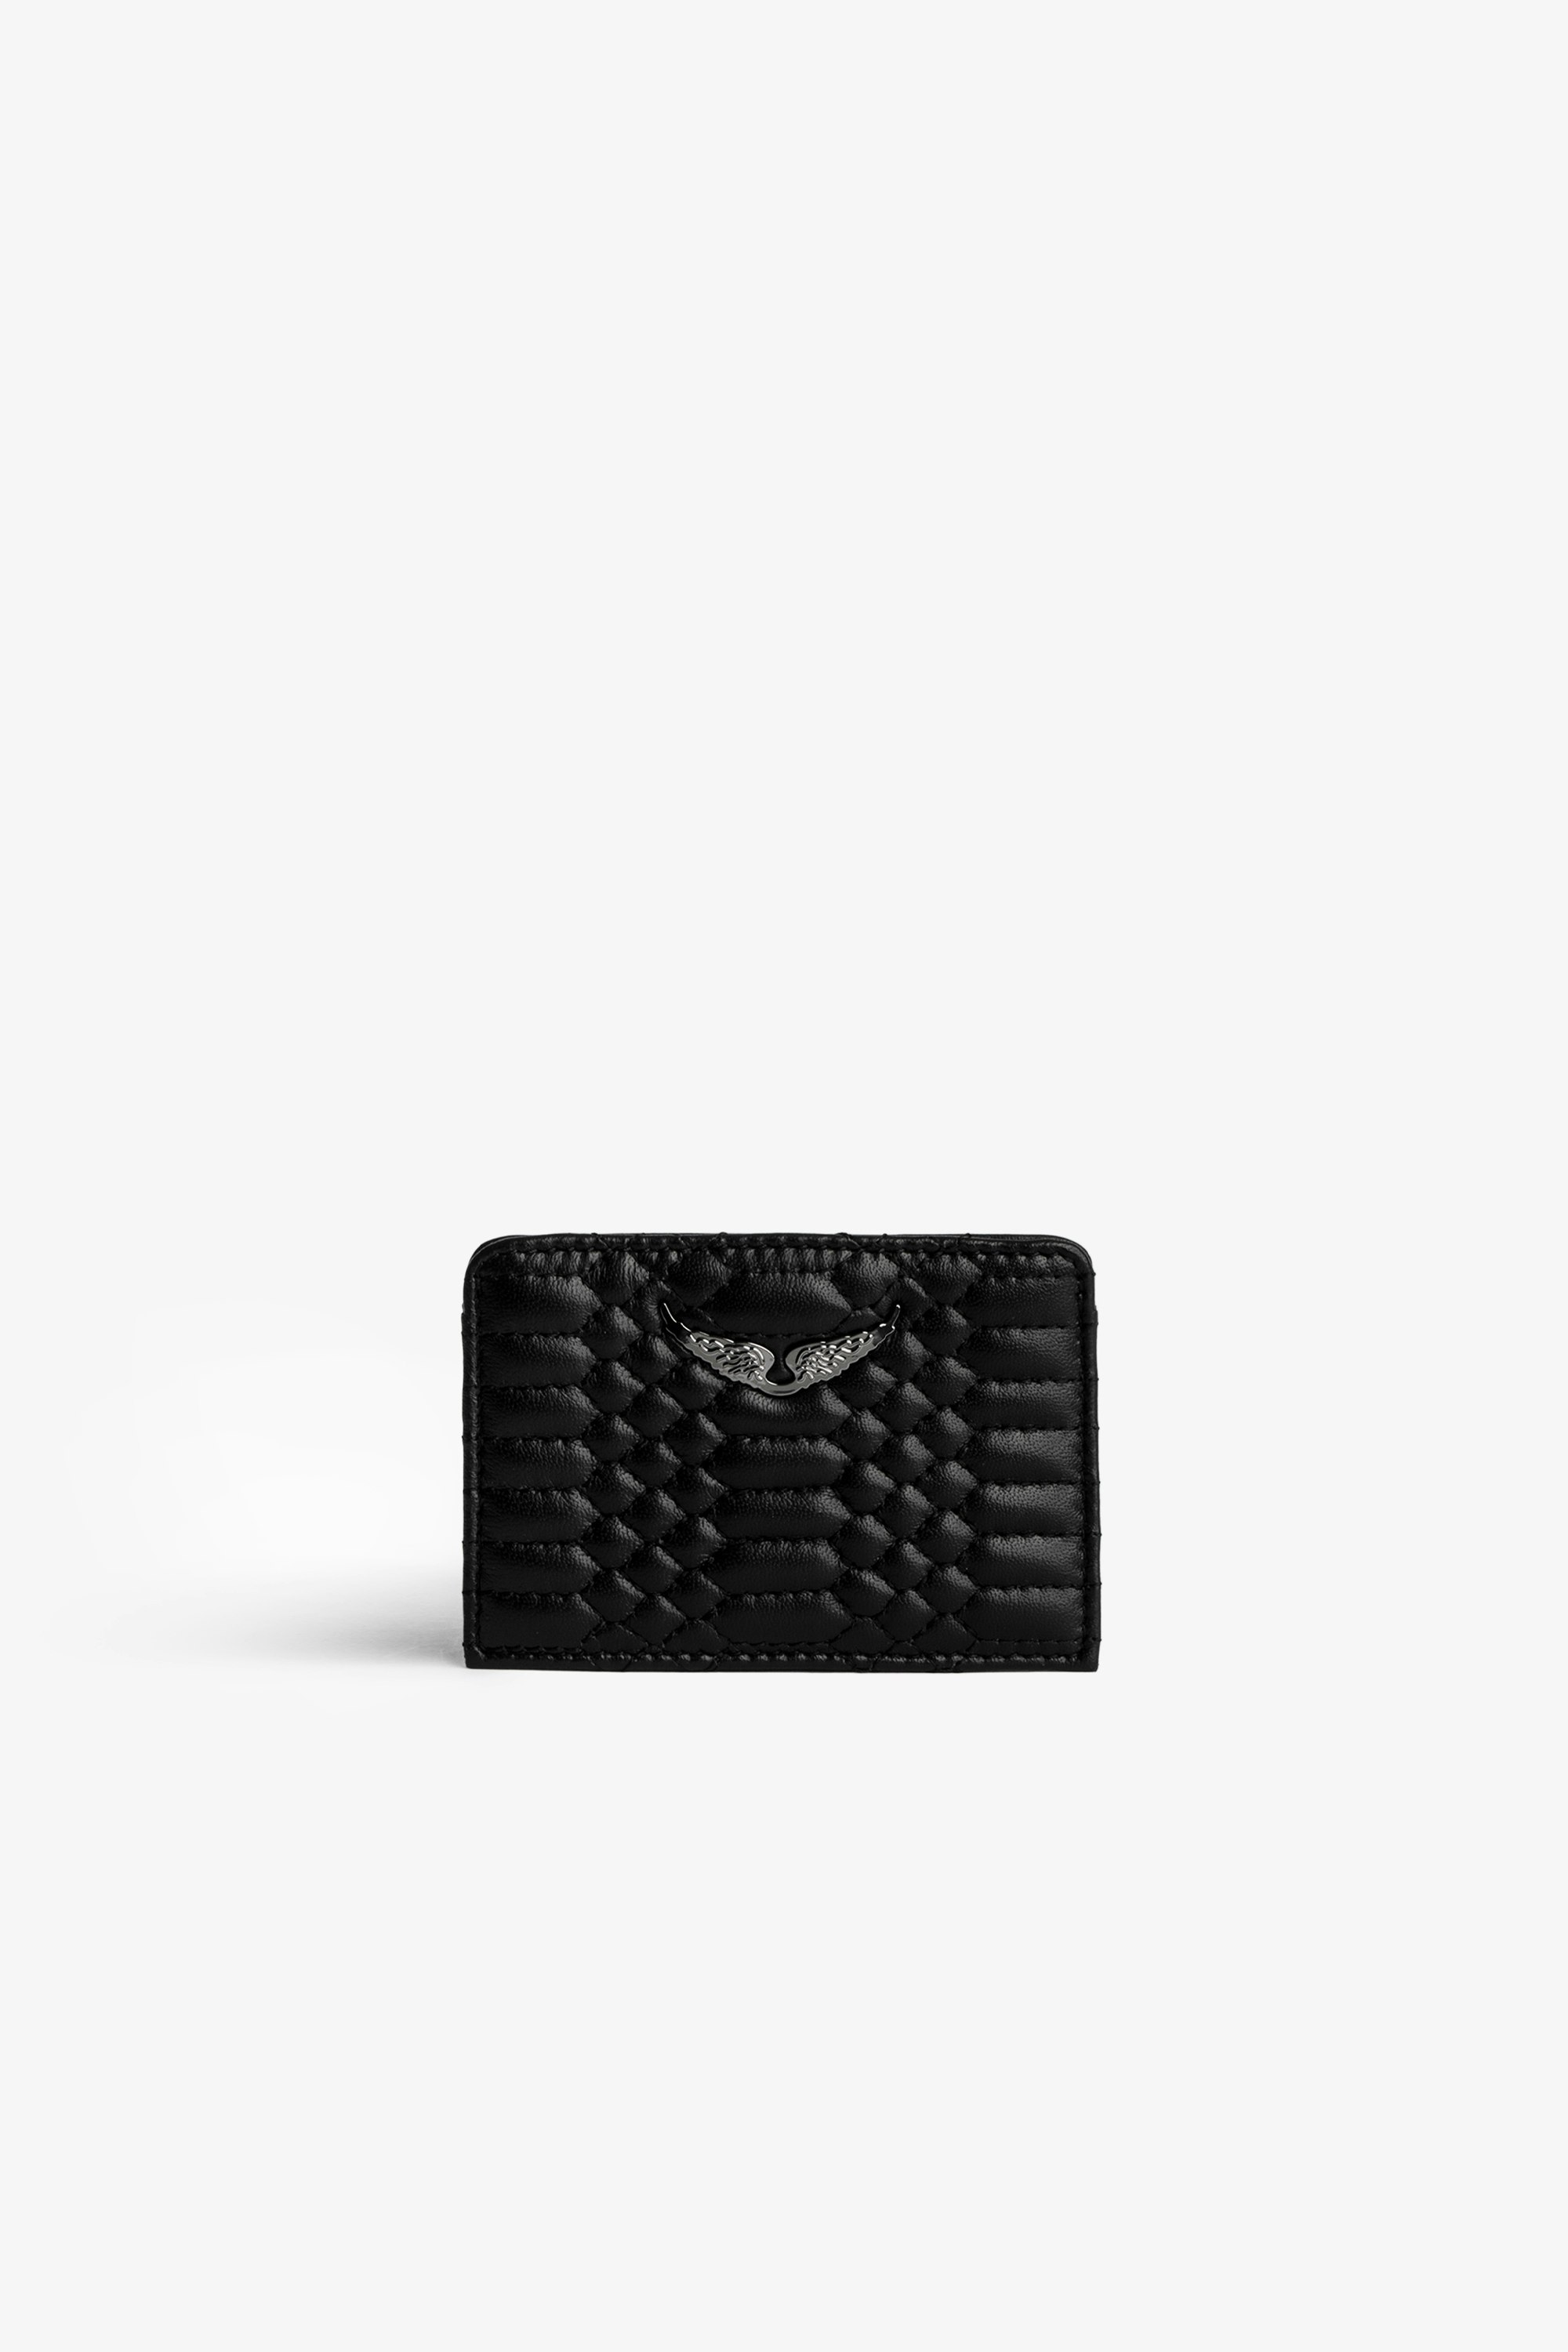 ZV Pass Card Holder Women's matte black quilted leather card holder